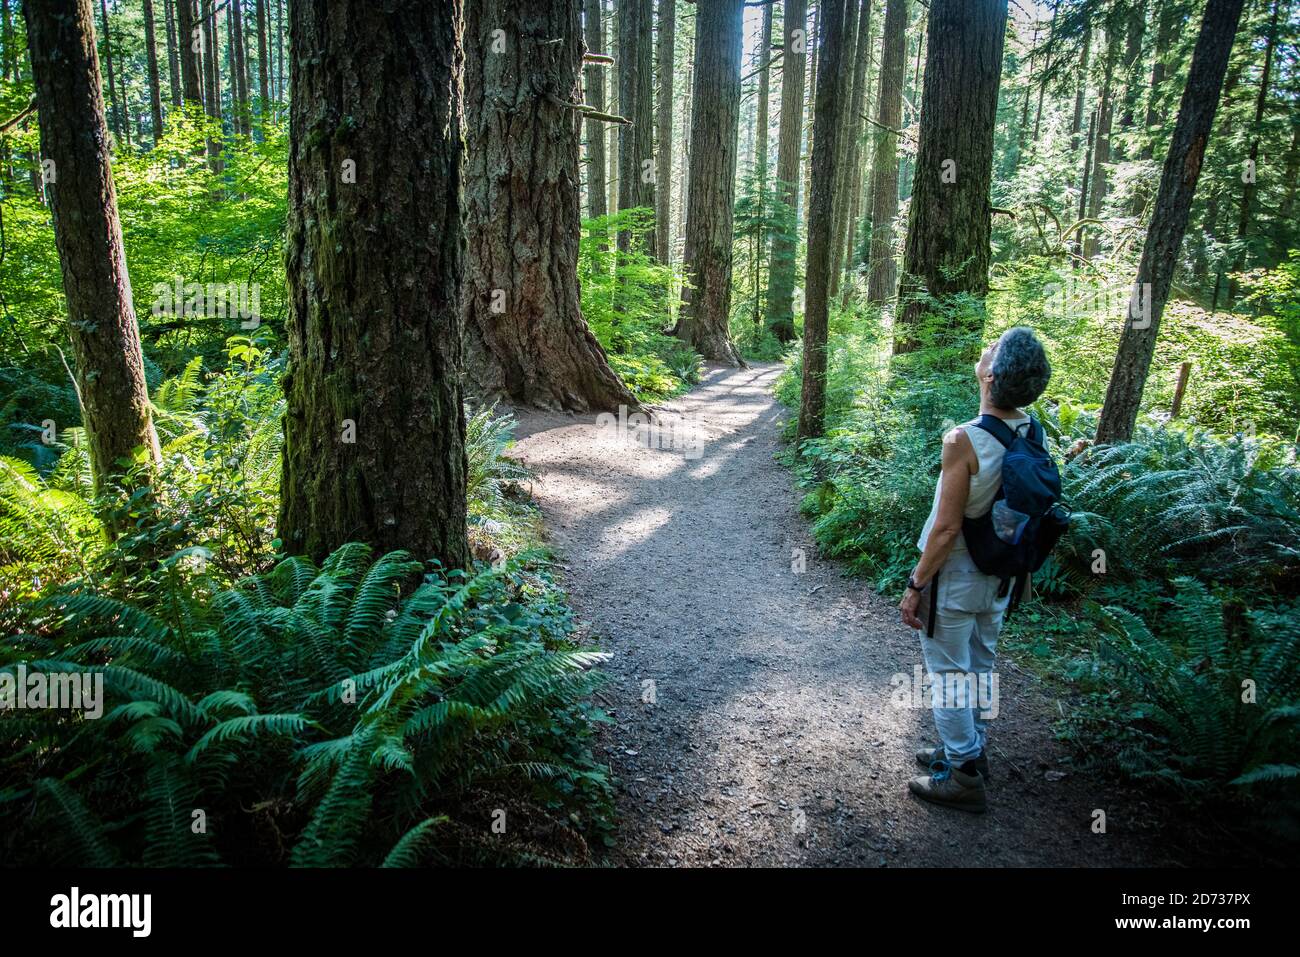 Large trees in the forest at Silver Falls State Park, Oregon. Stock Photo